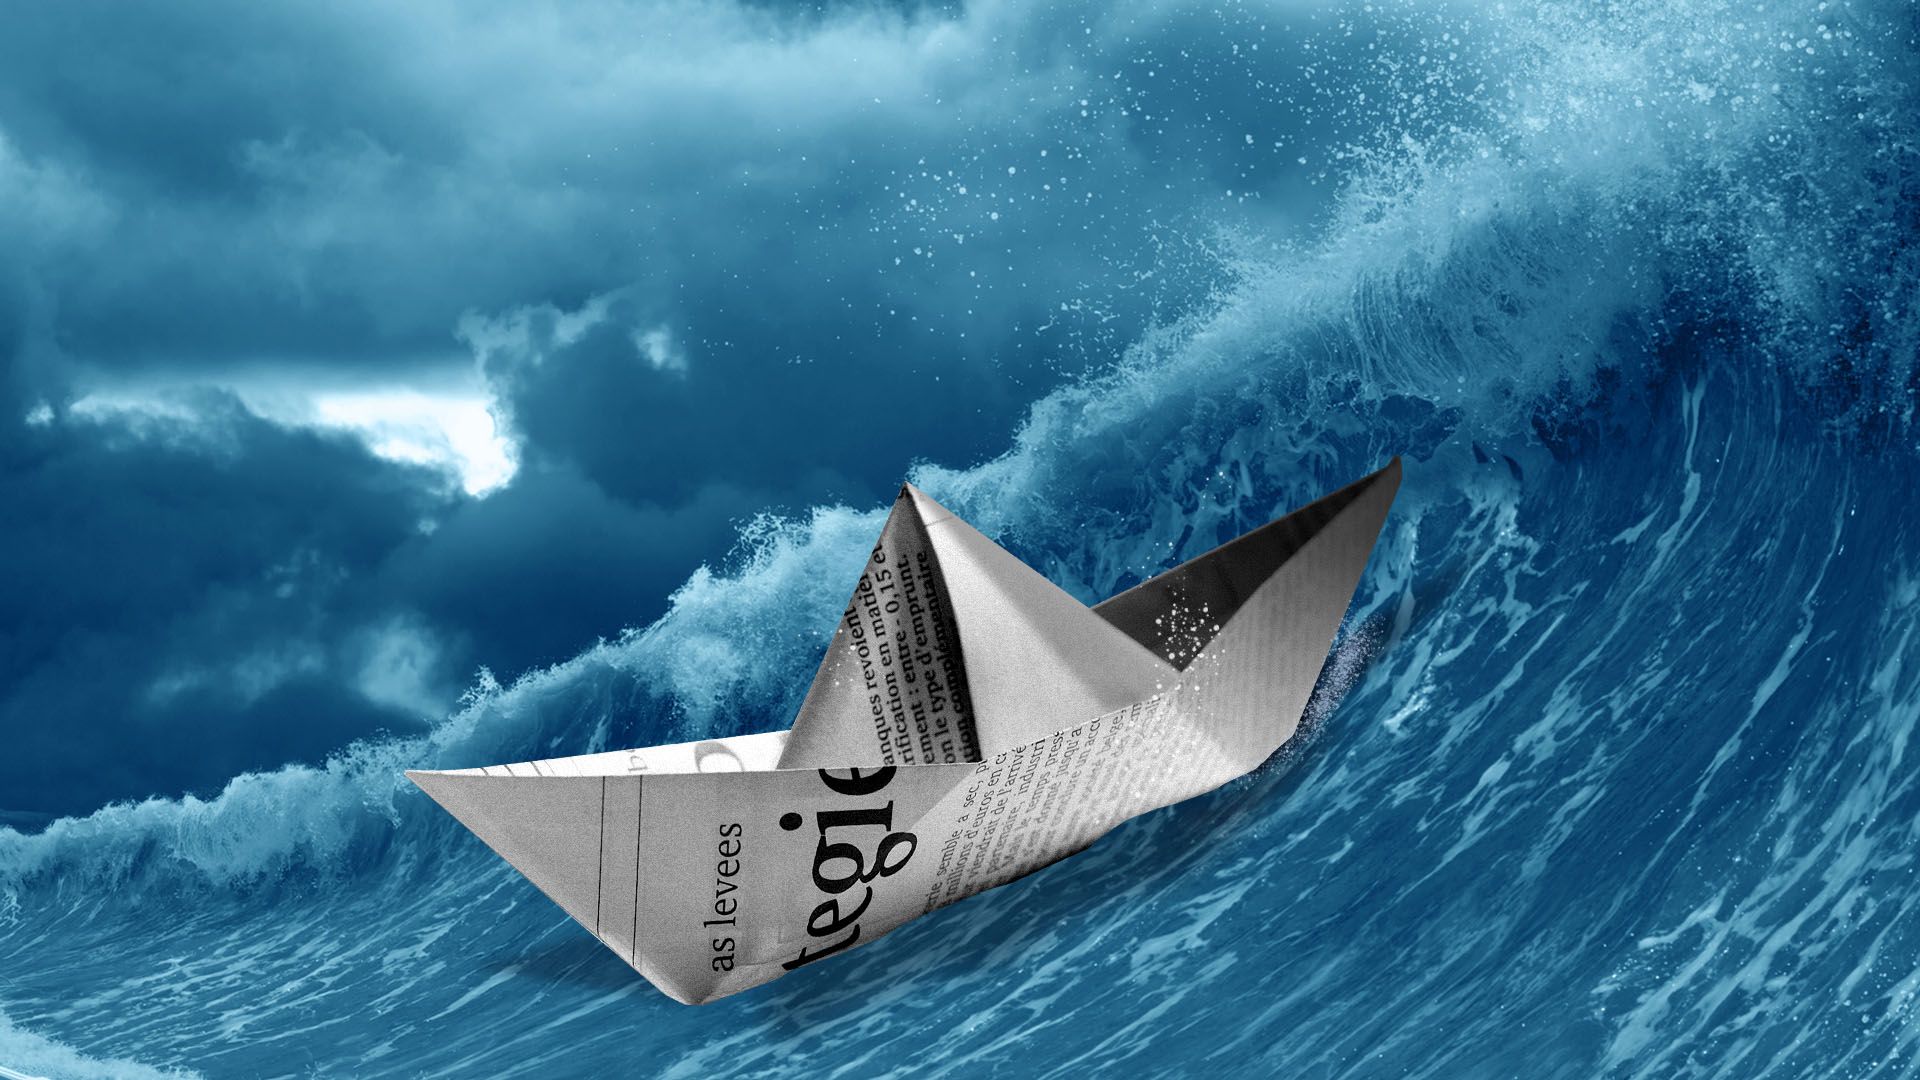 Illustration of a newspaper boat caught in a giant wave